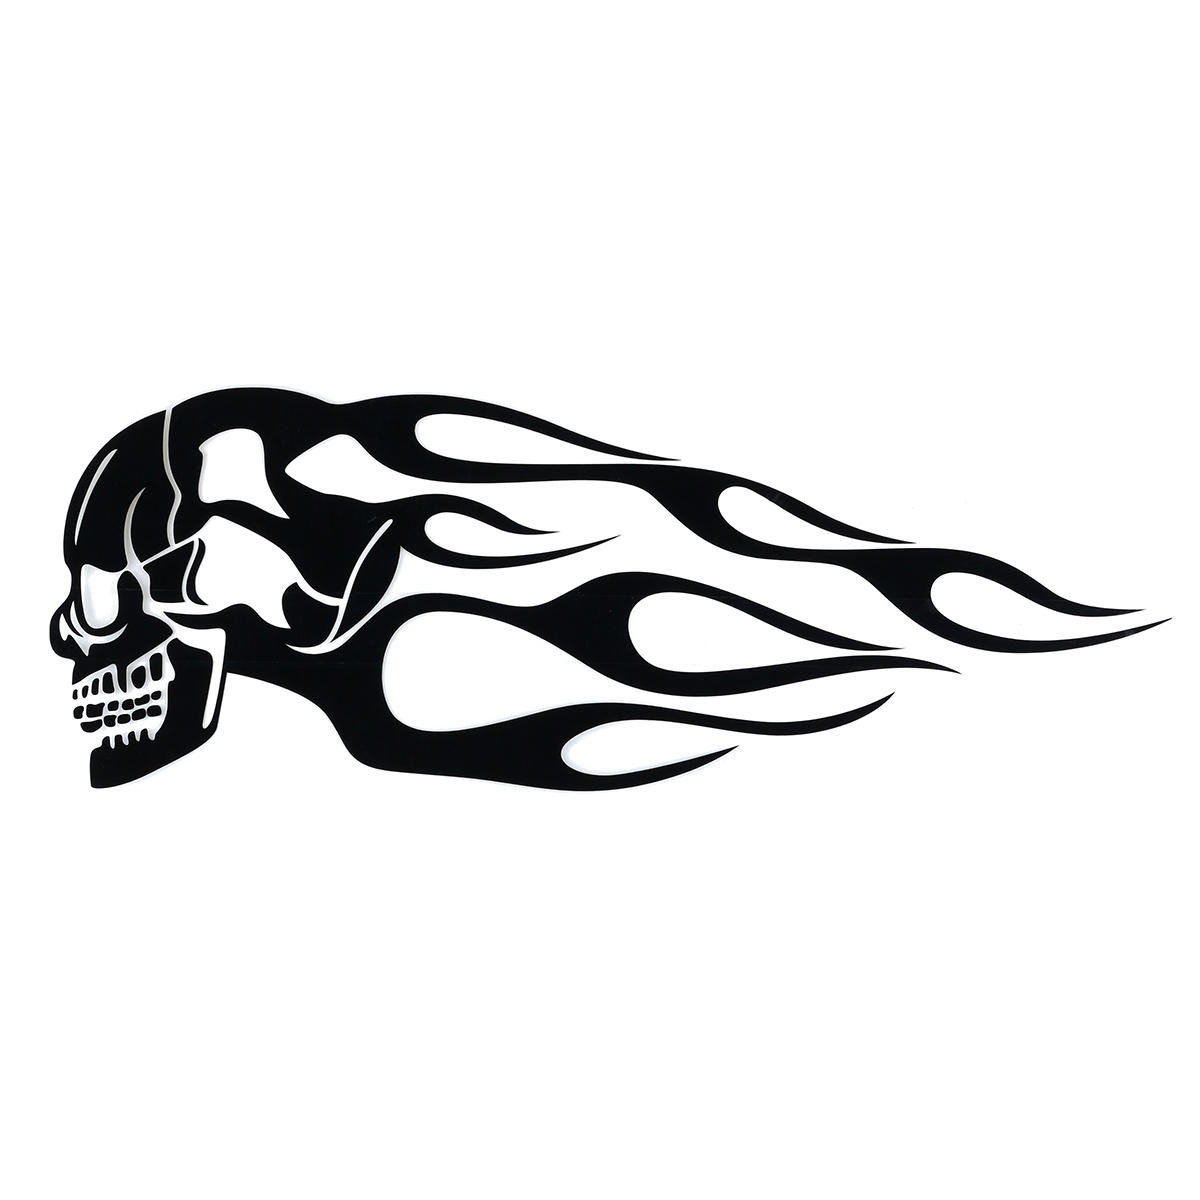 2pcs 13.5x5inch Universal Motorcycle Gas Tank Flames Skull Badge Decal Sticker